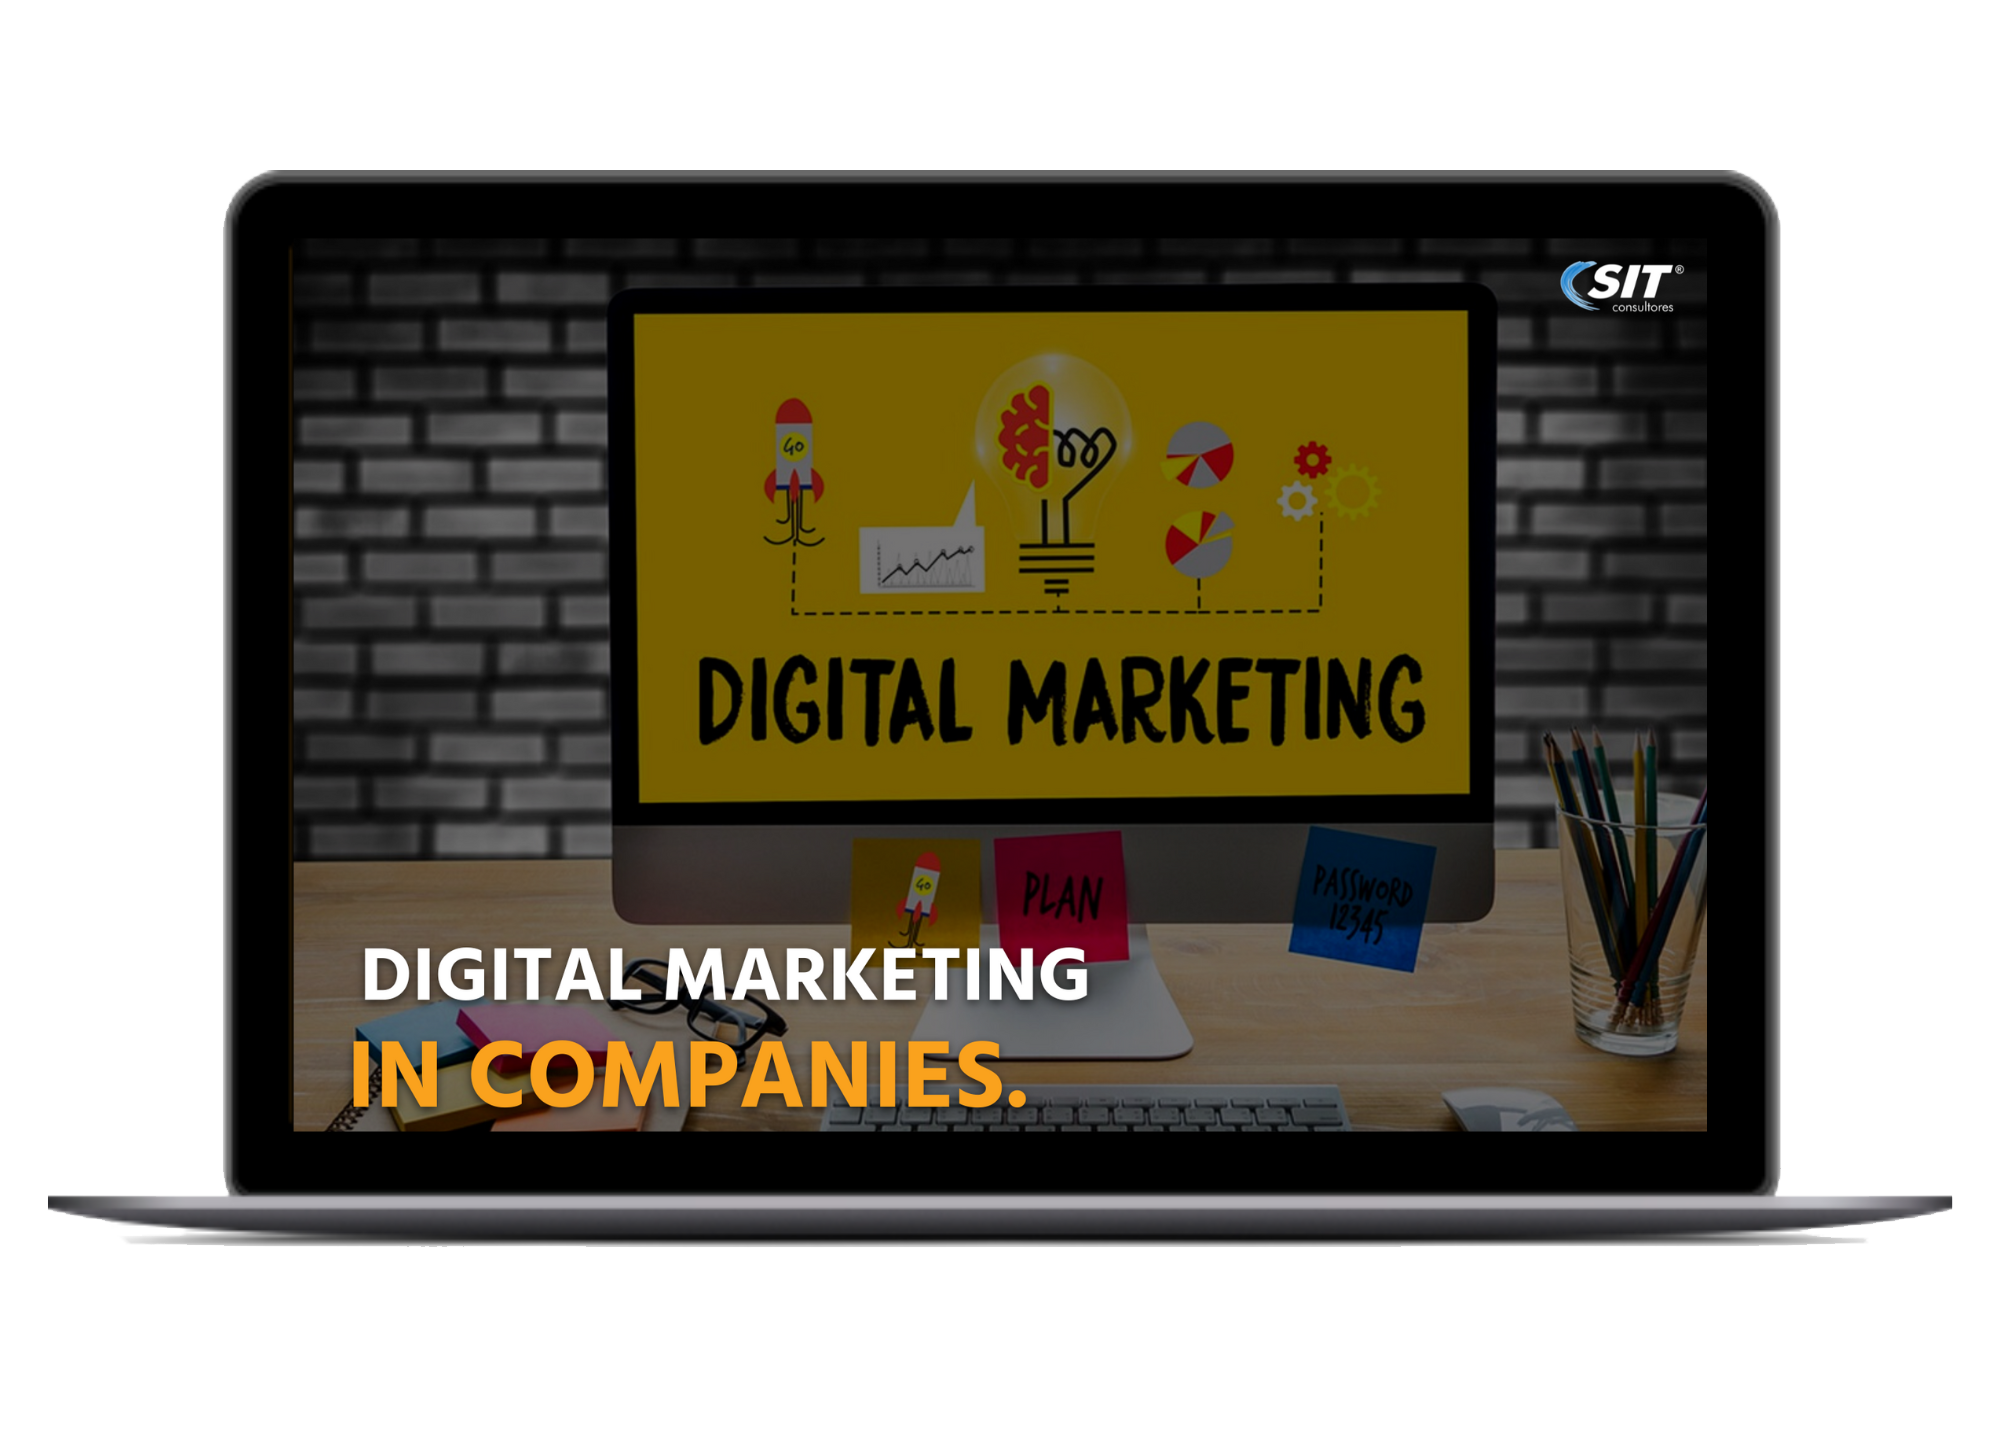 What is digital marketing in companies?